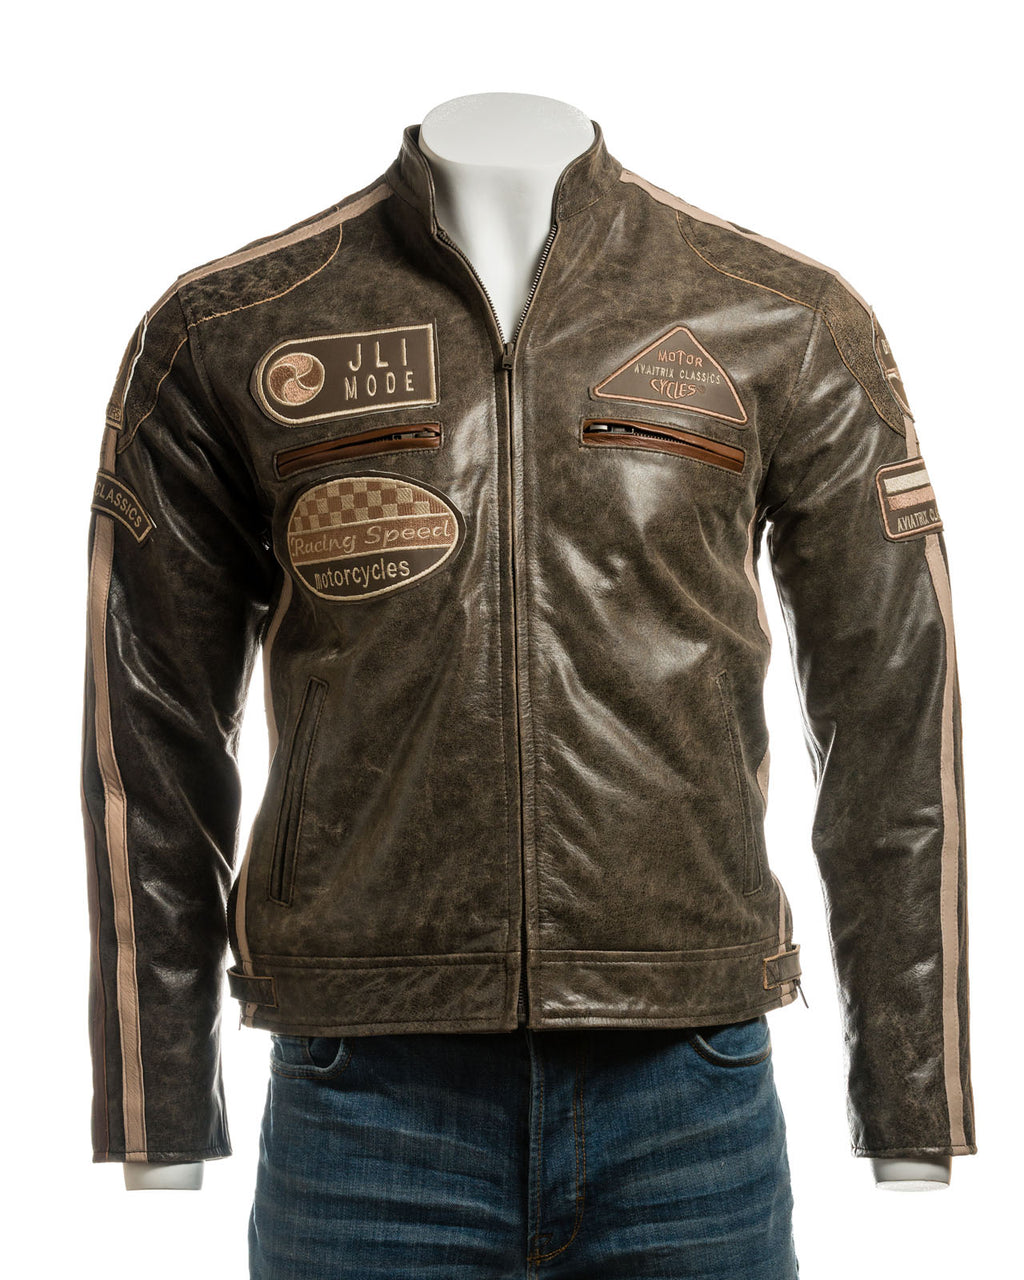 Men's Vintage Style Racing Biker Style Leather Jacket: Paolo